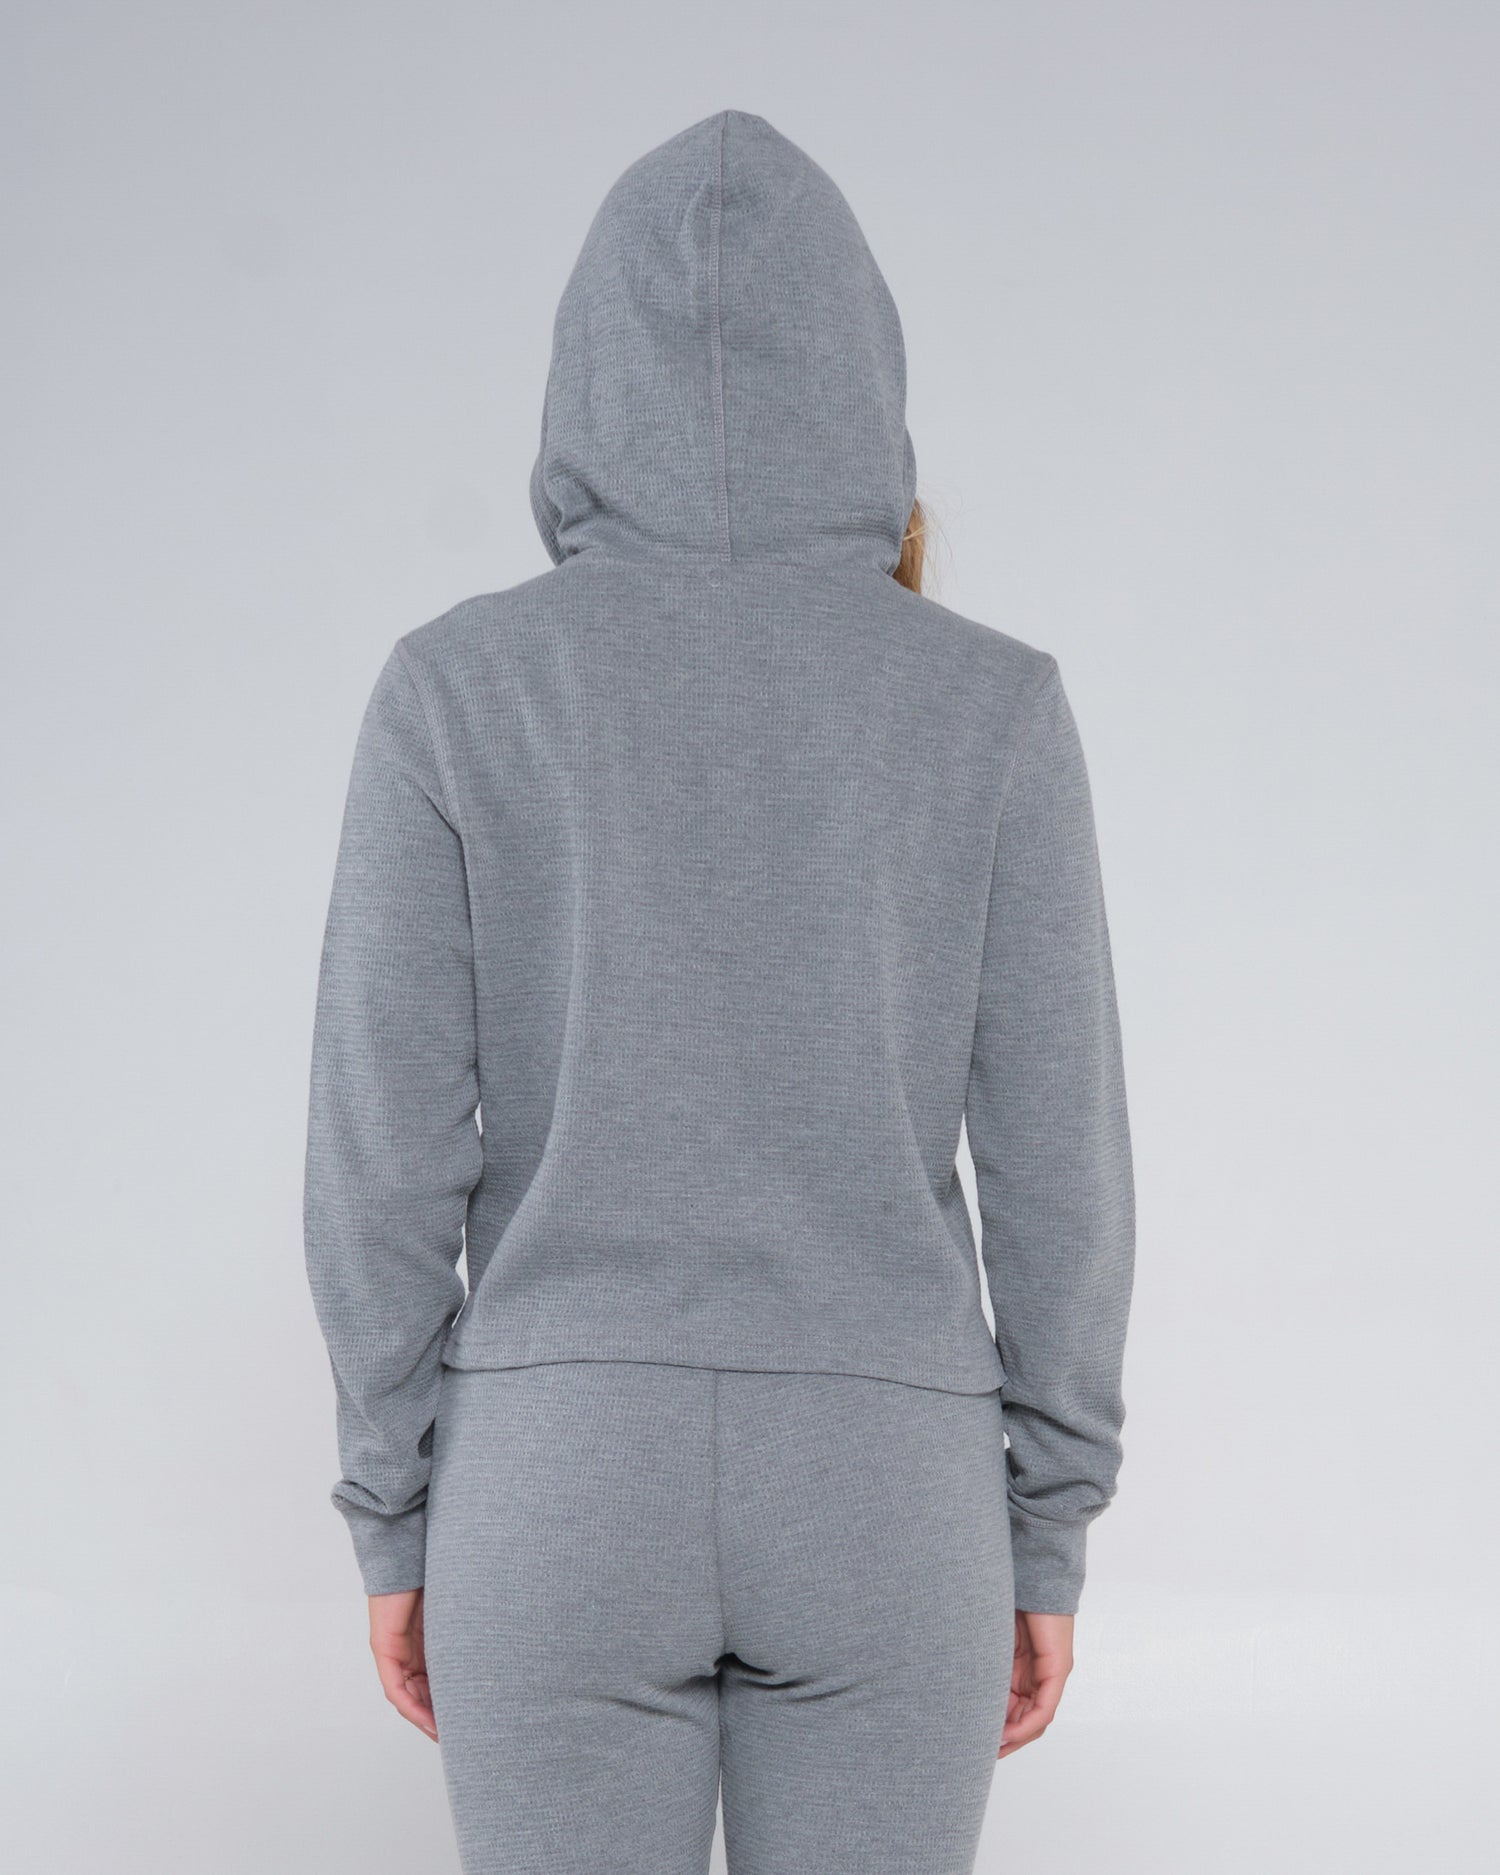 On body back of the Tippet Henley Heather Grey Hoody